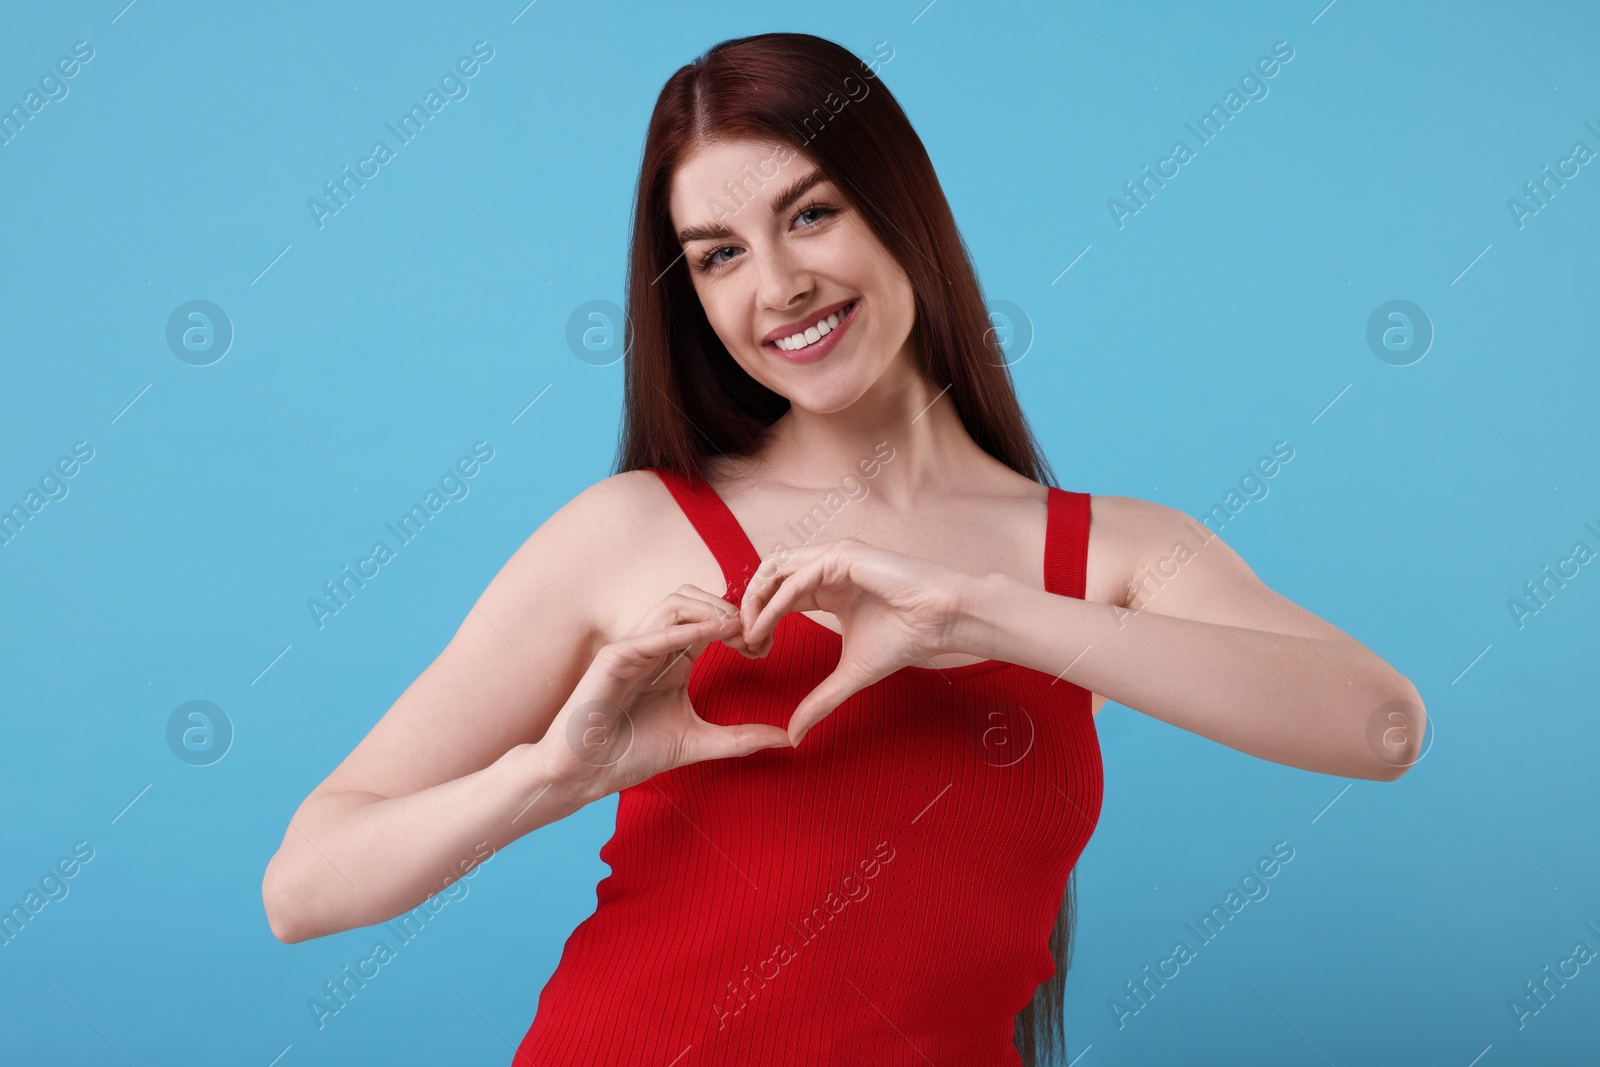 Photo of Happy young woman showing heart gesture with hands on light blue background